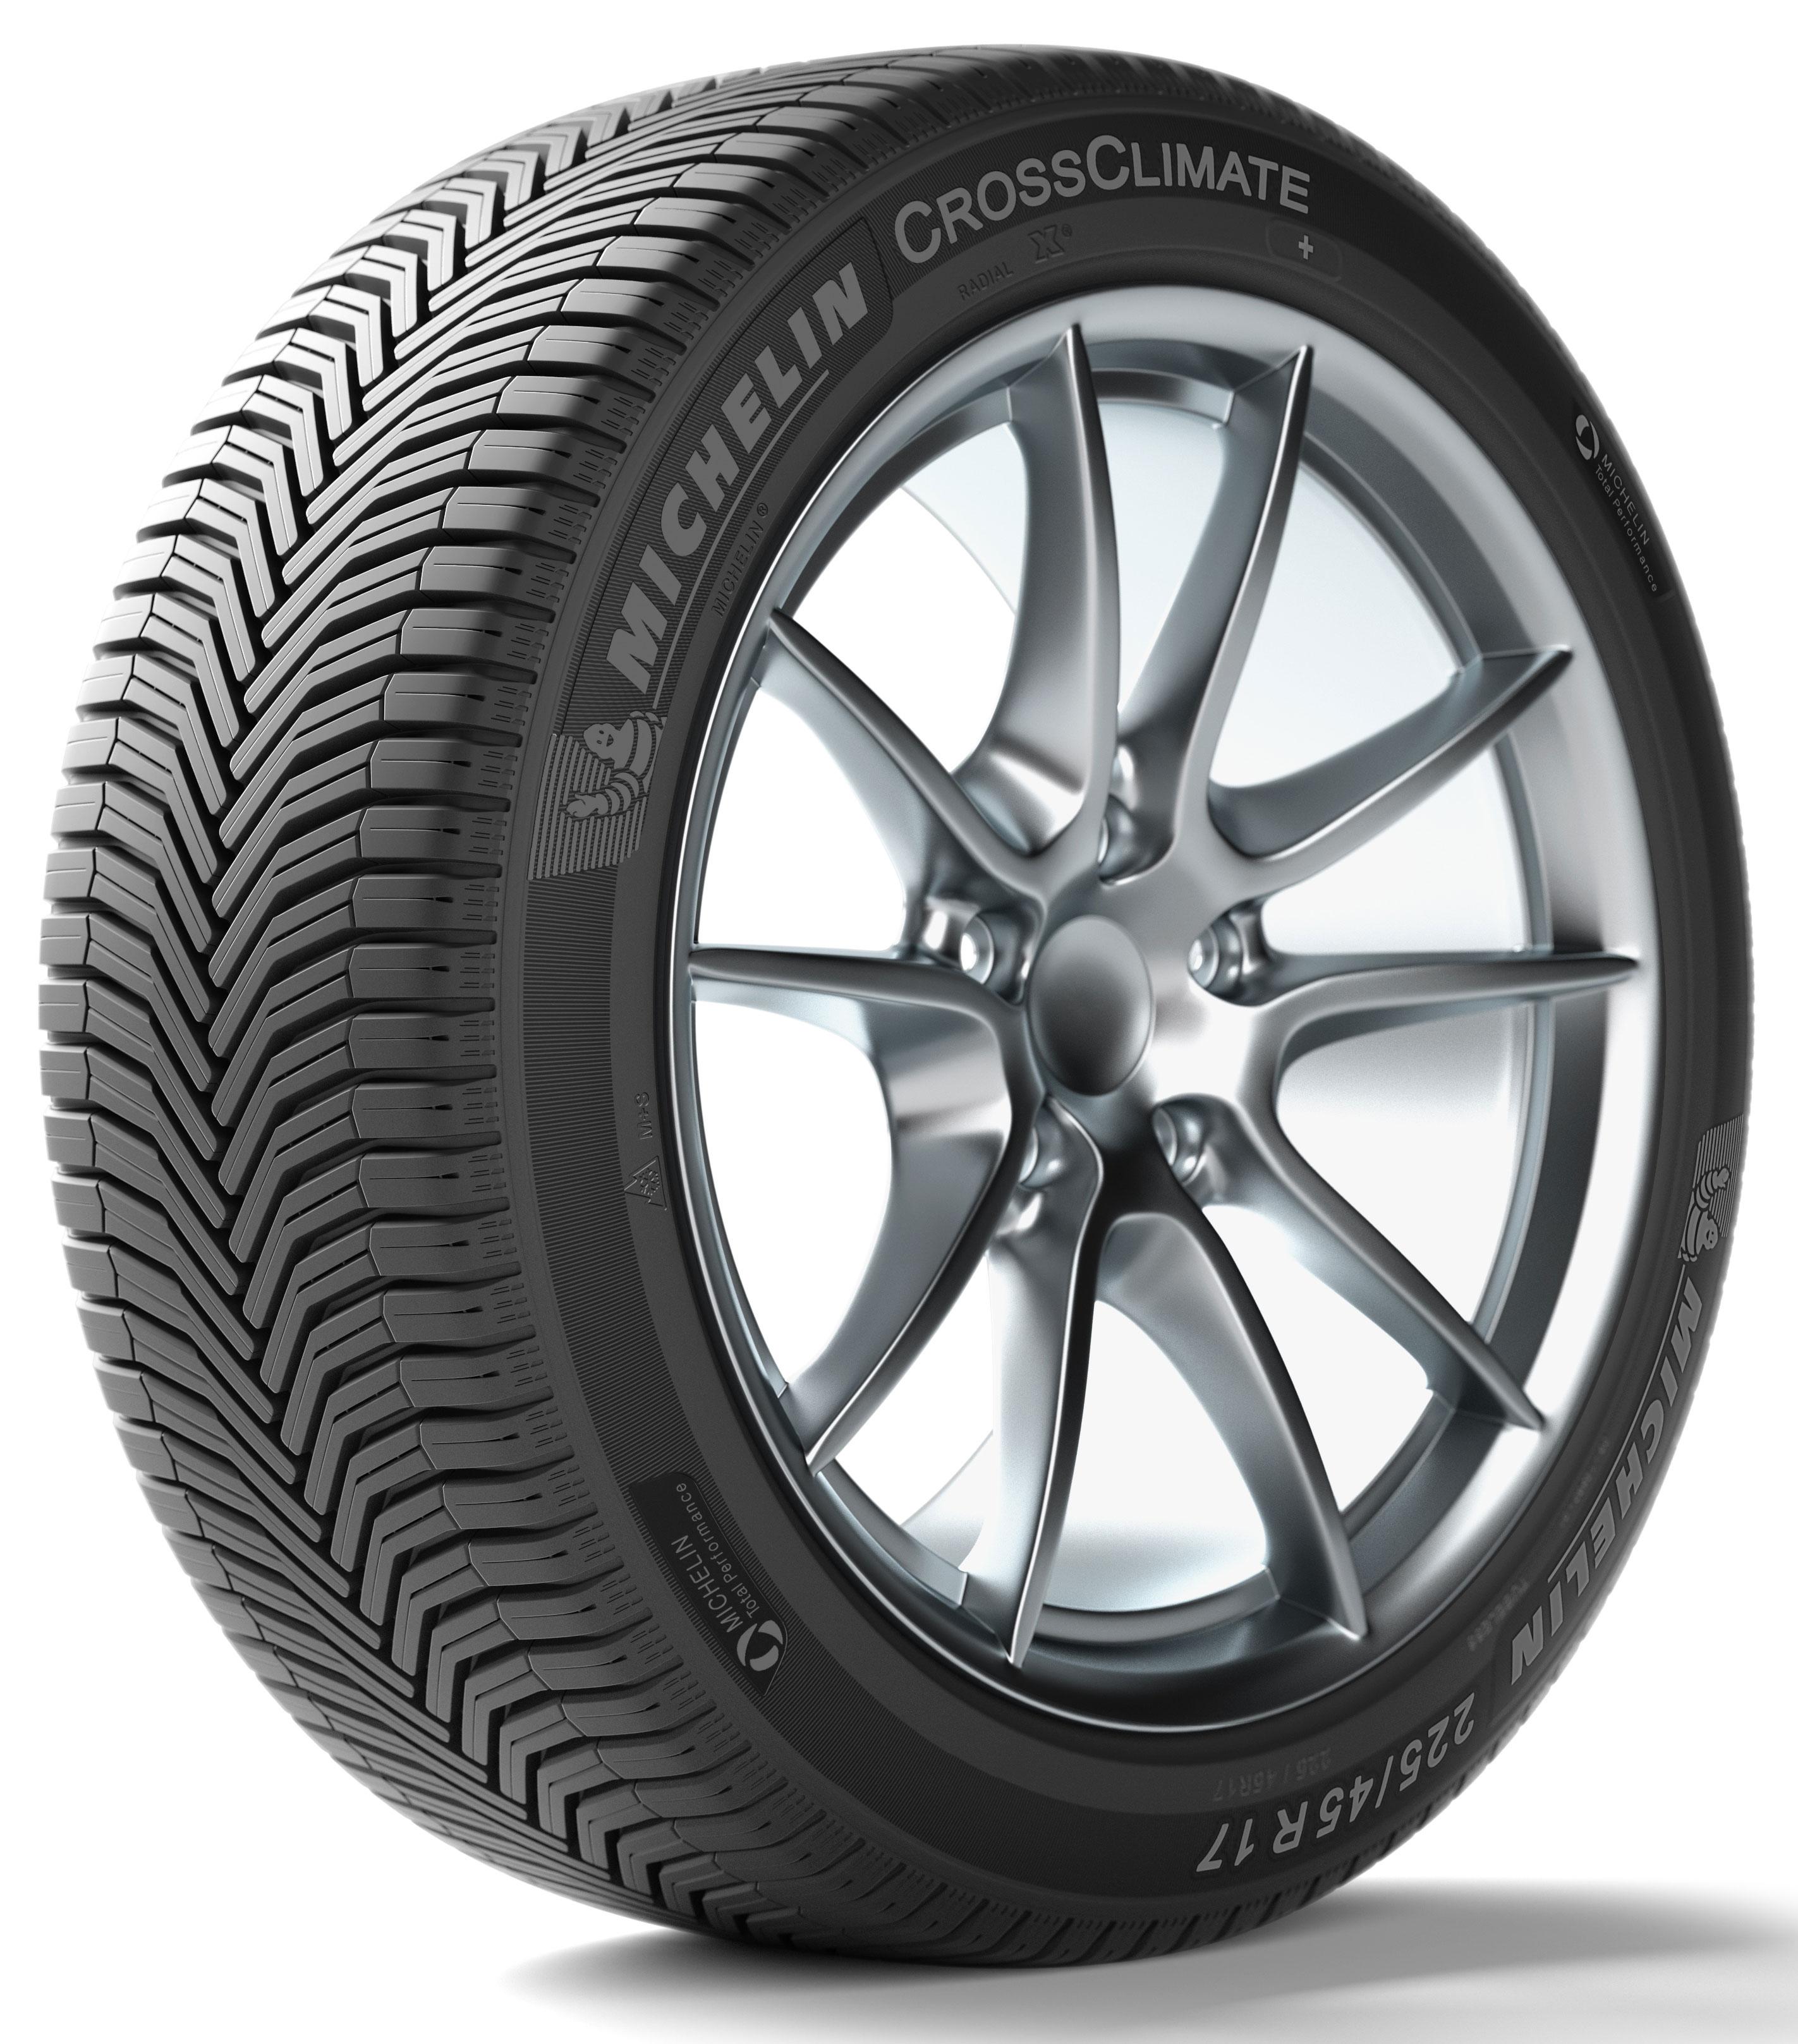 Anvelope all seasons MICHELIN CrossClimate M+S 195/75 R16C 107/105R